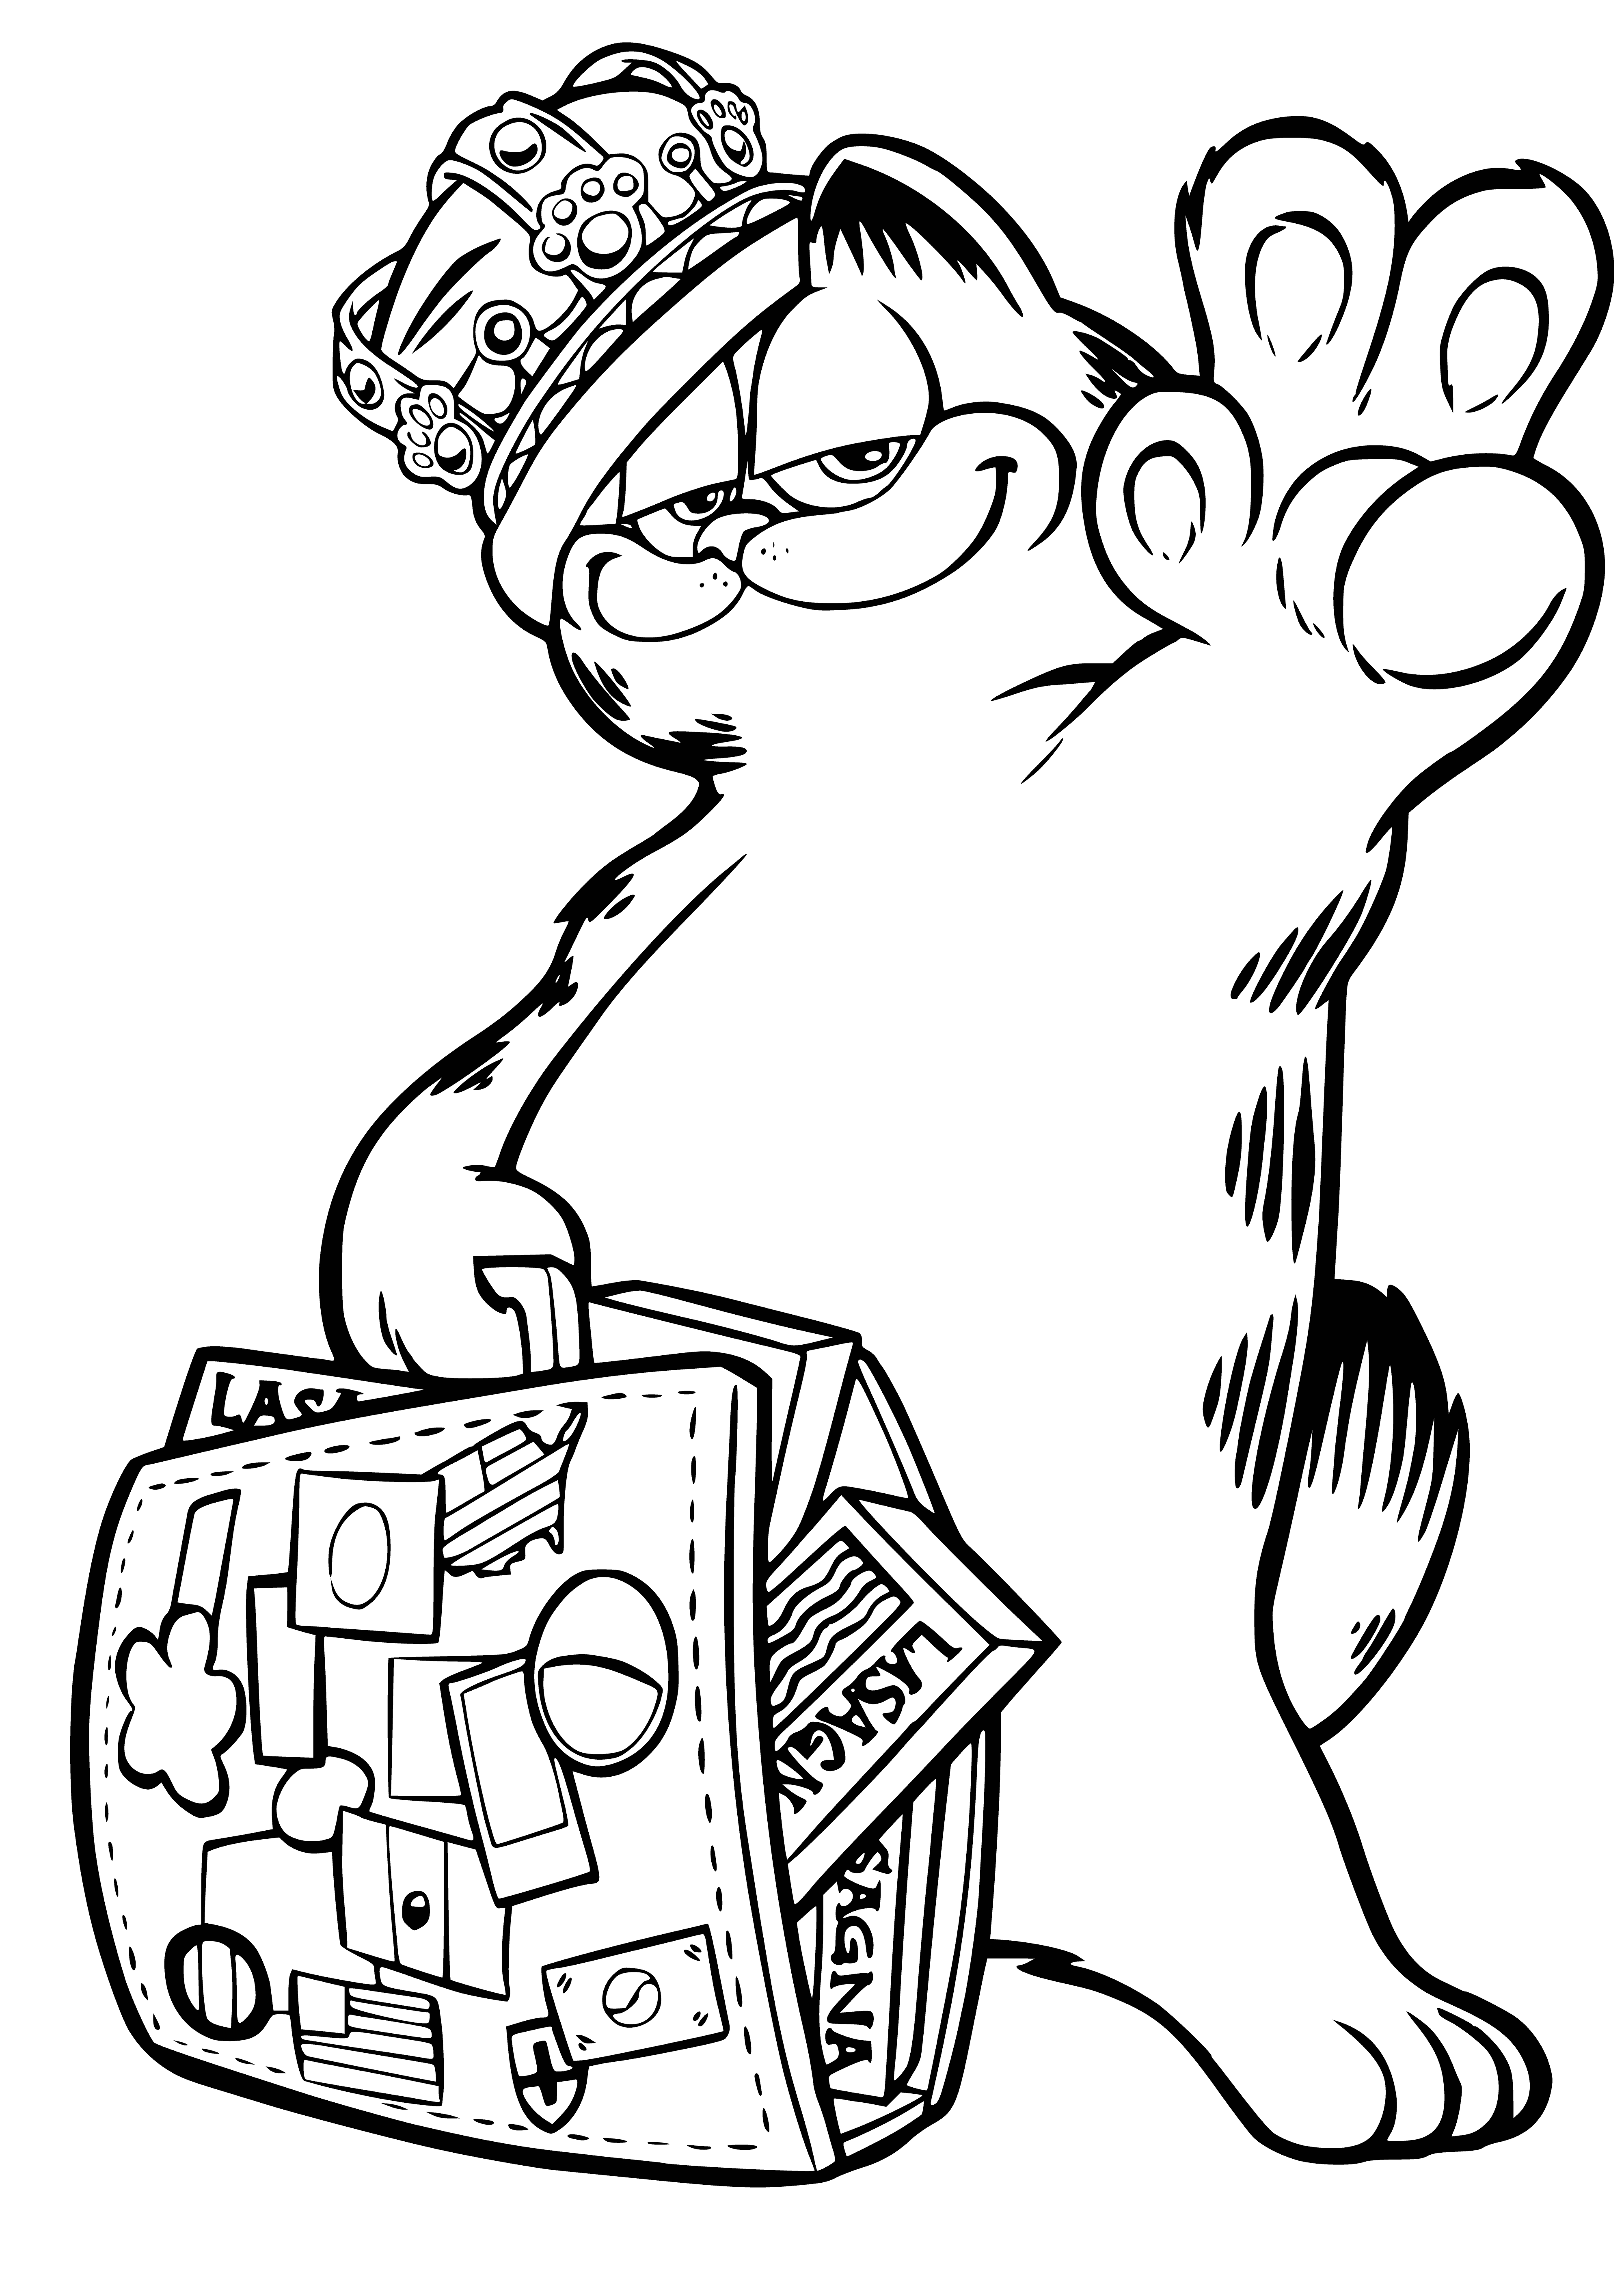 Garfield the traveler coloring page